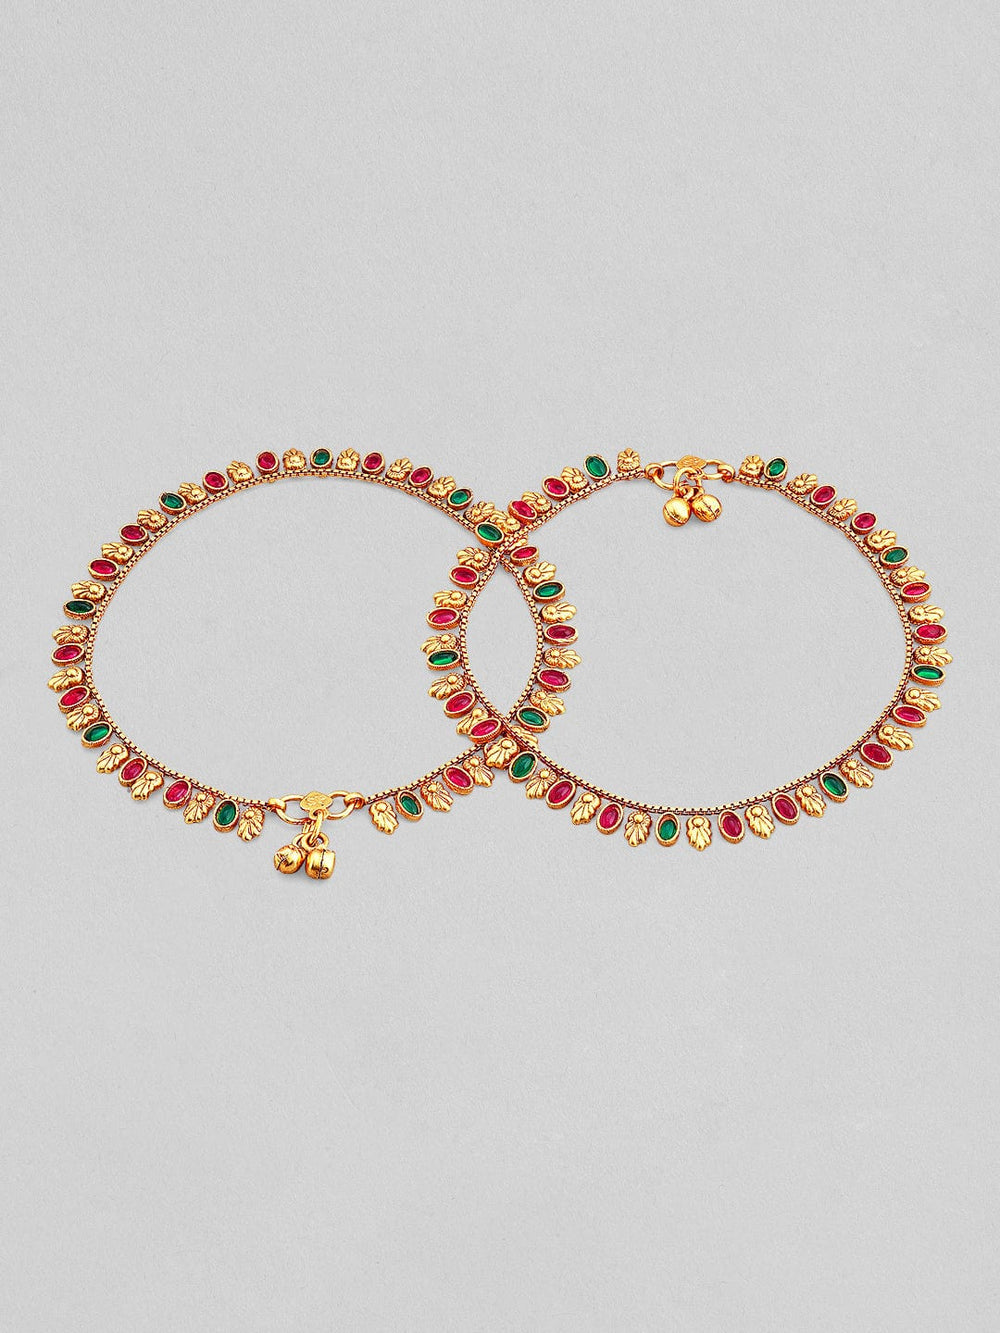 Rubans 24k Gold Plated Anklet With Red And Green Stones. Anklets